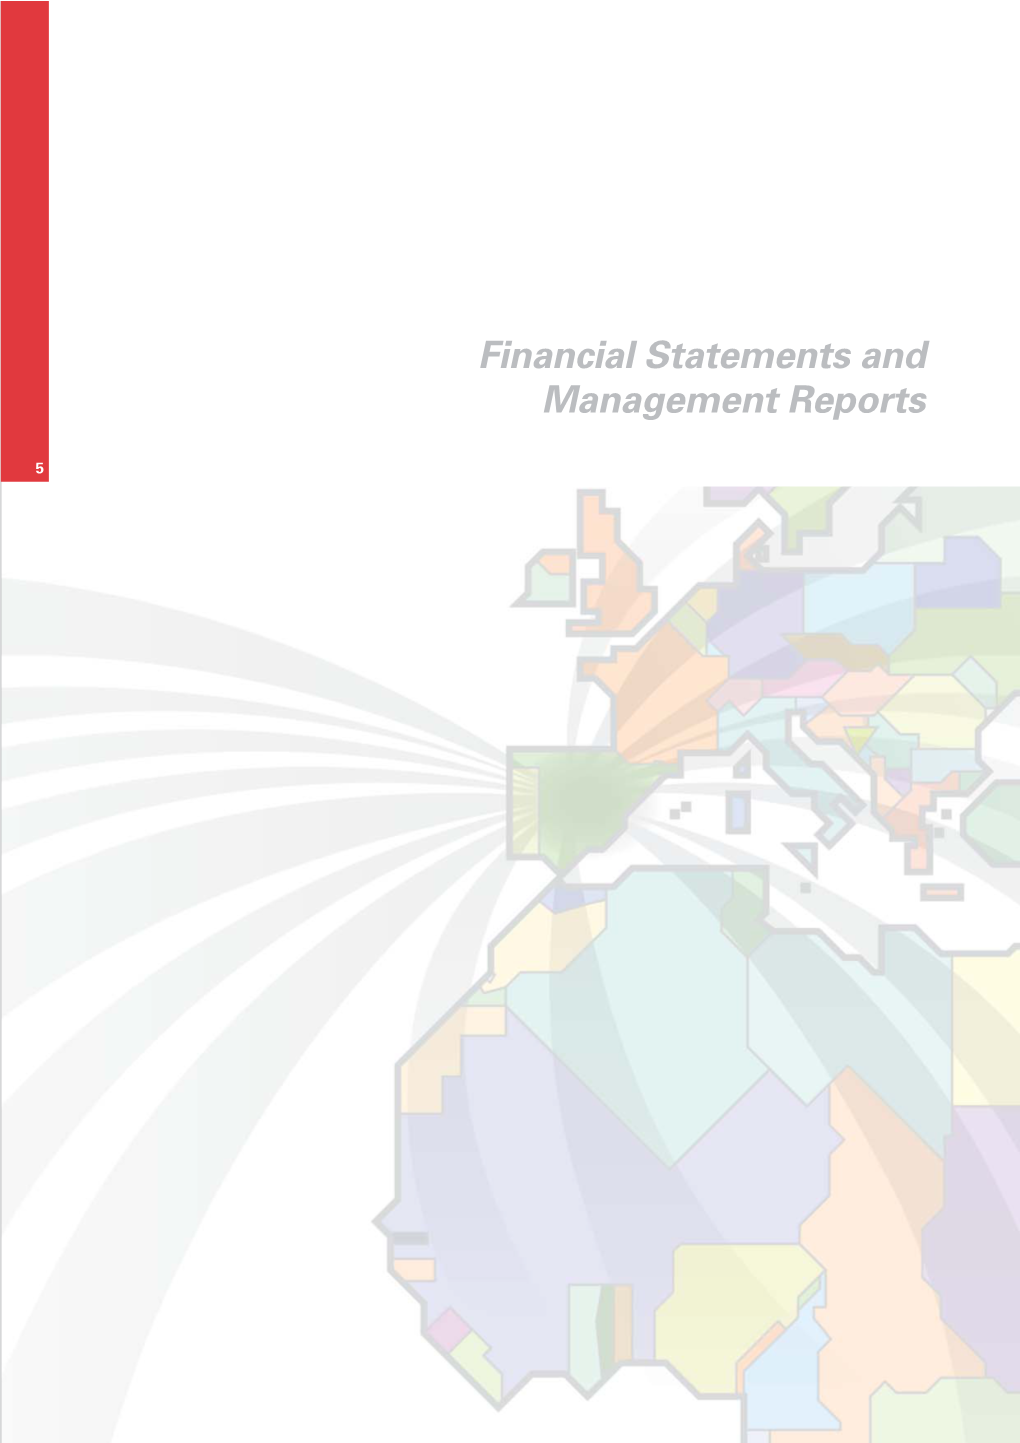 Financial Statements and Management Reports